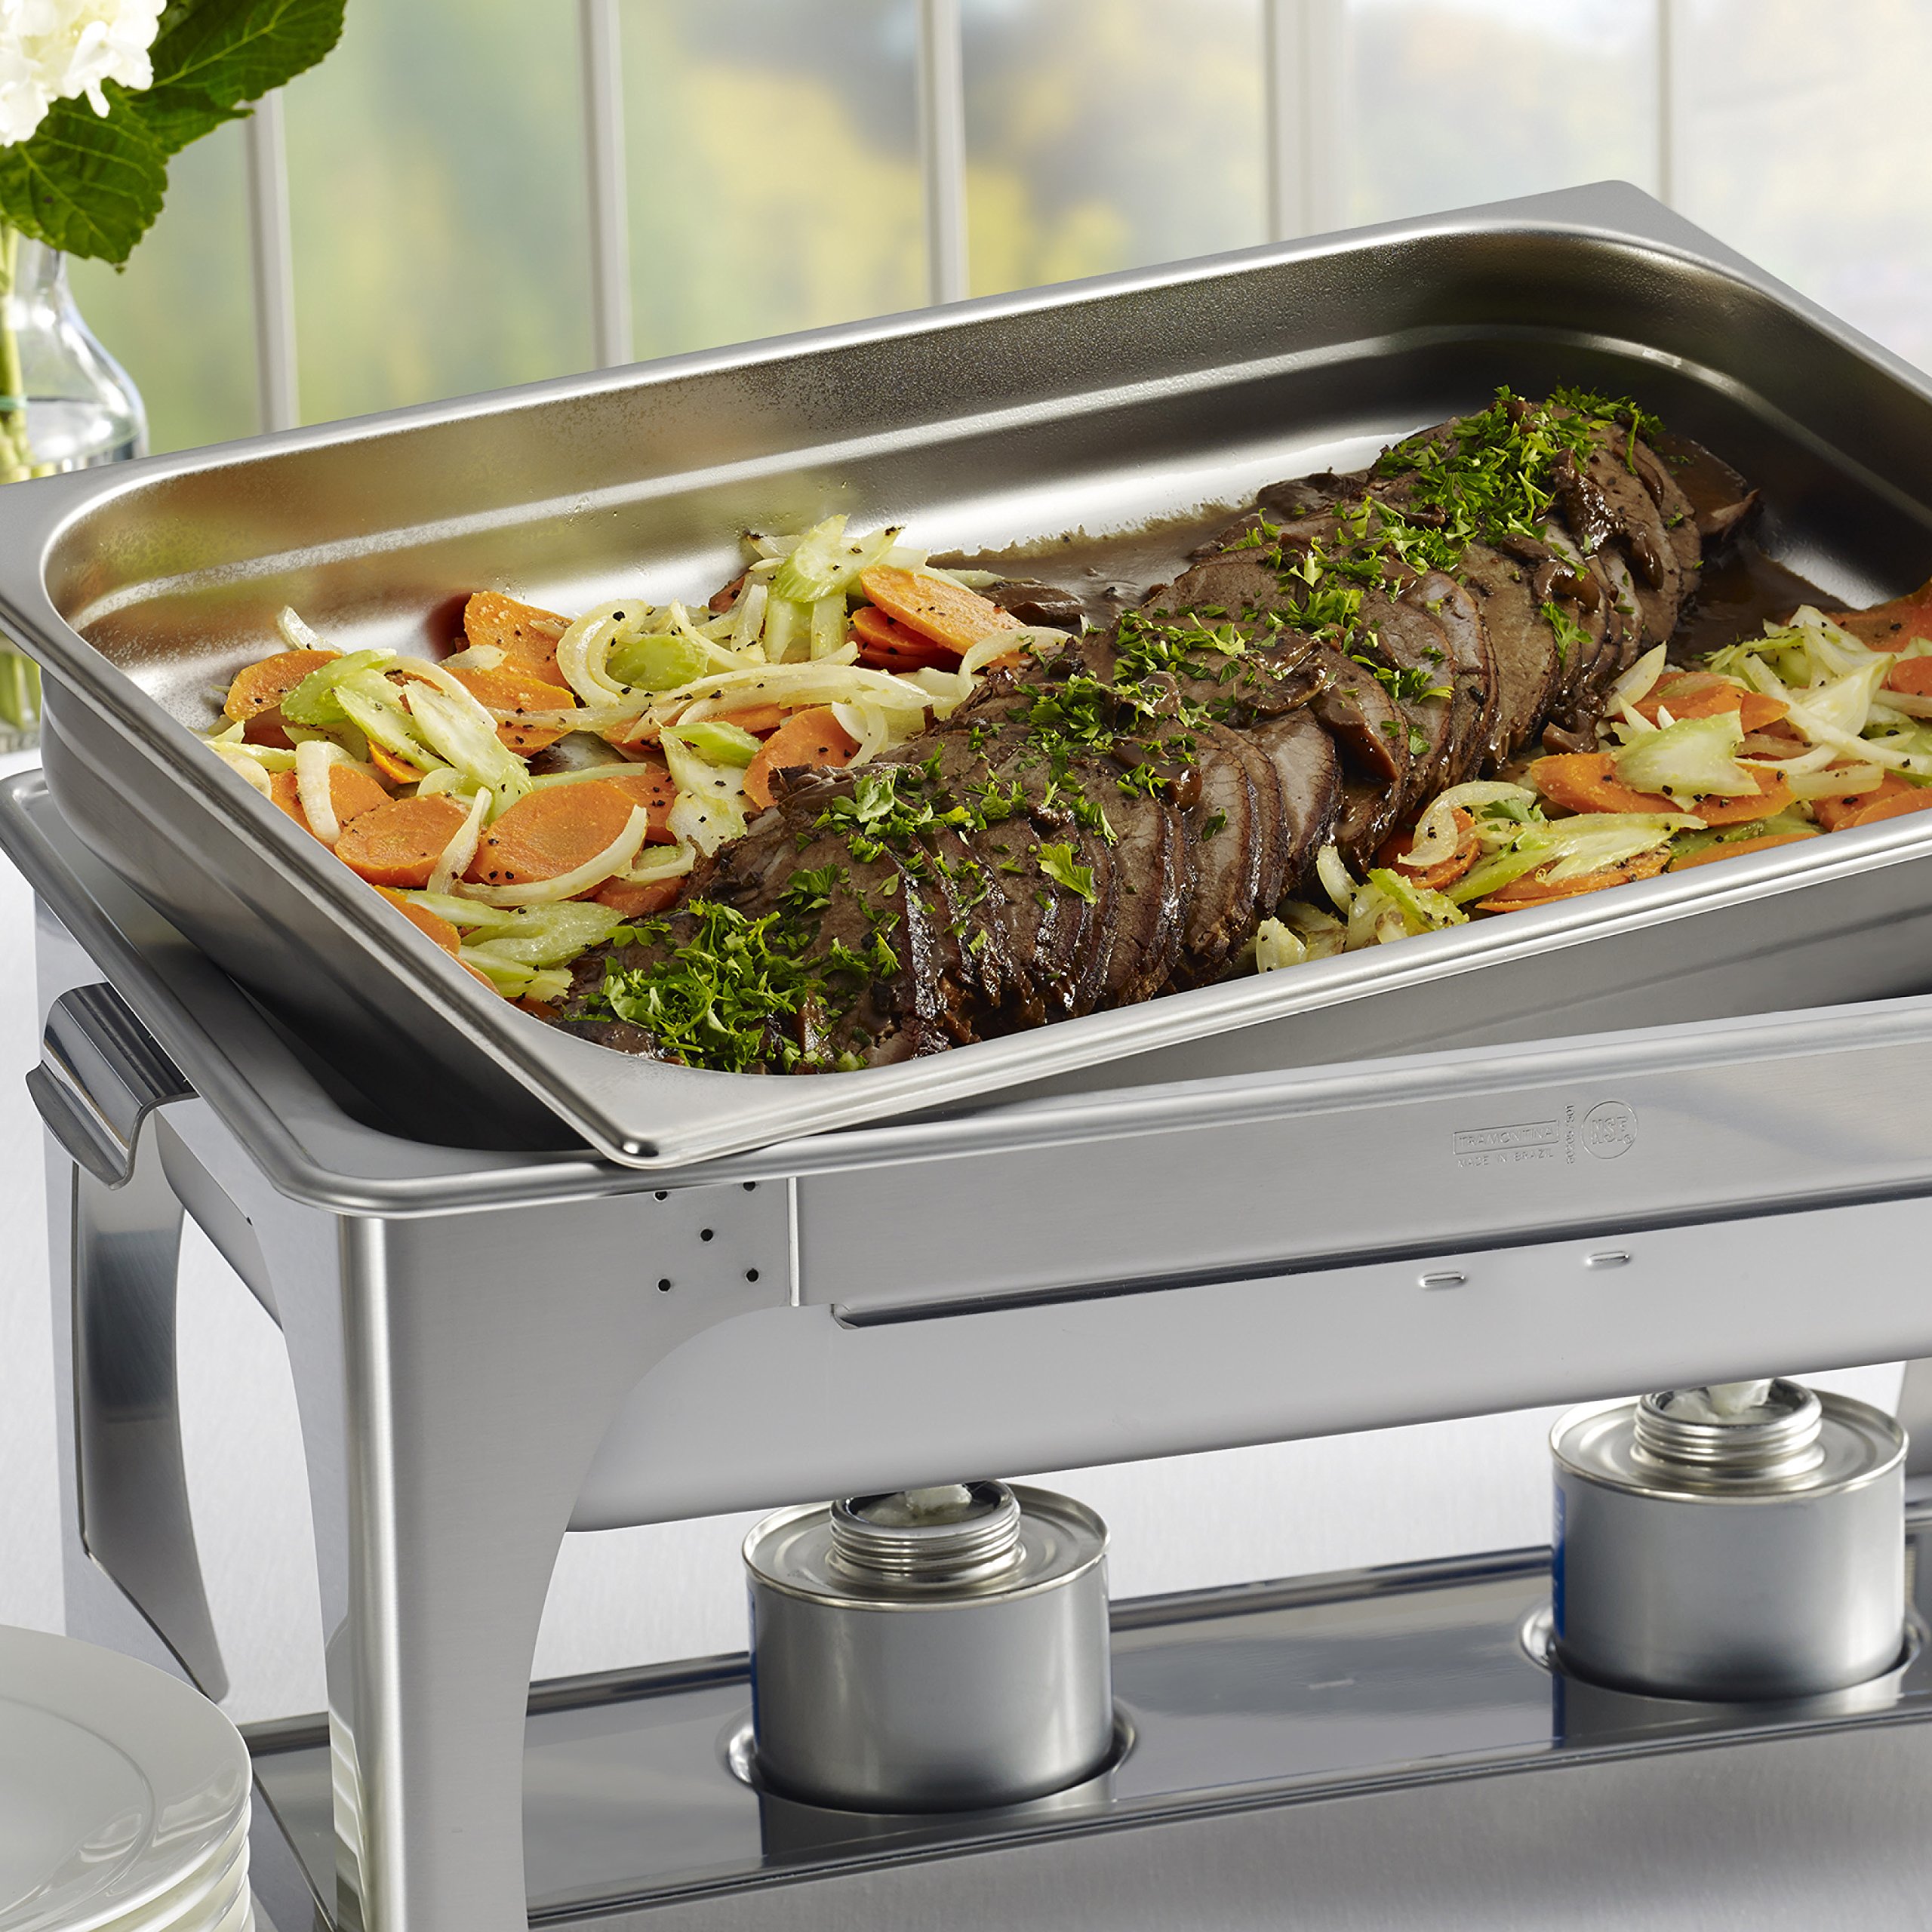 Tramontina Chafing Dish Pro-Line Stainless Steel 9-Quart, 80205/520DS